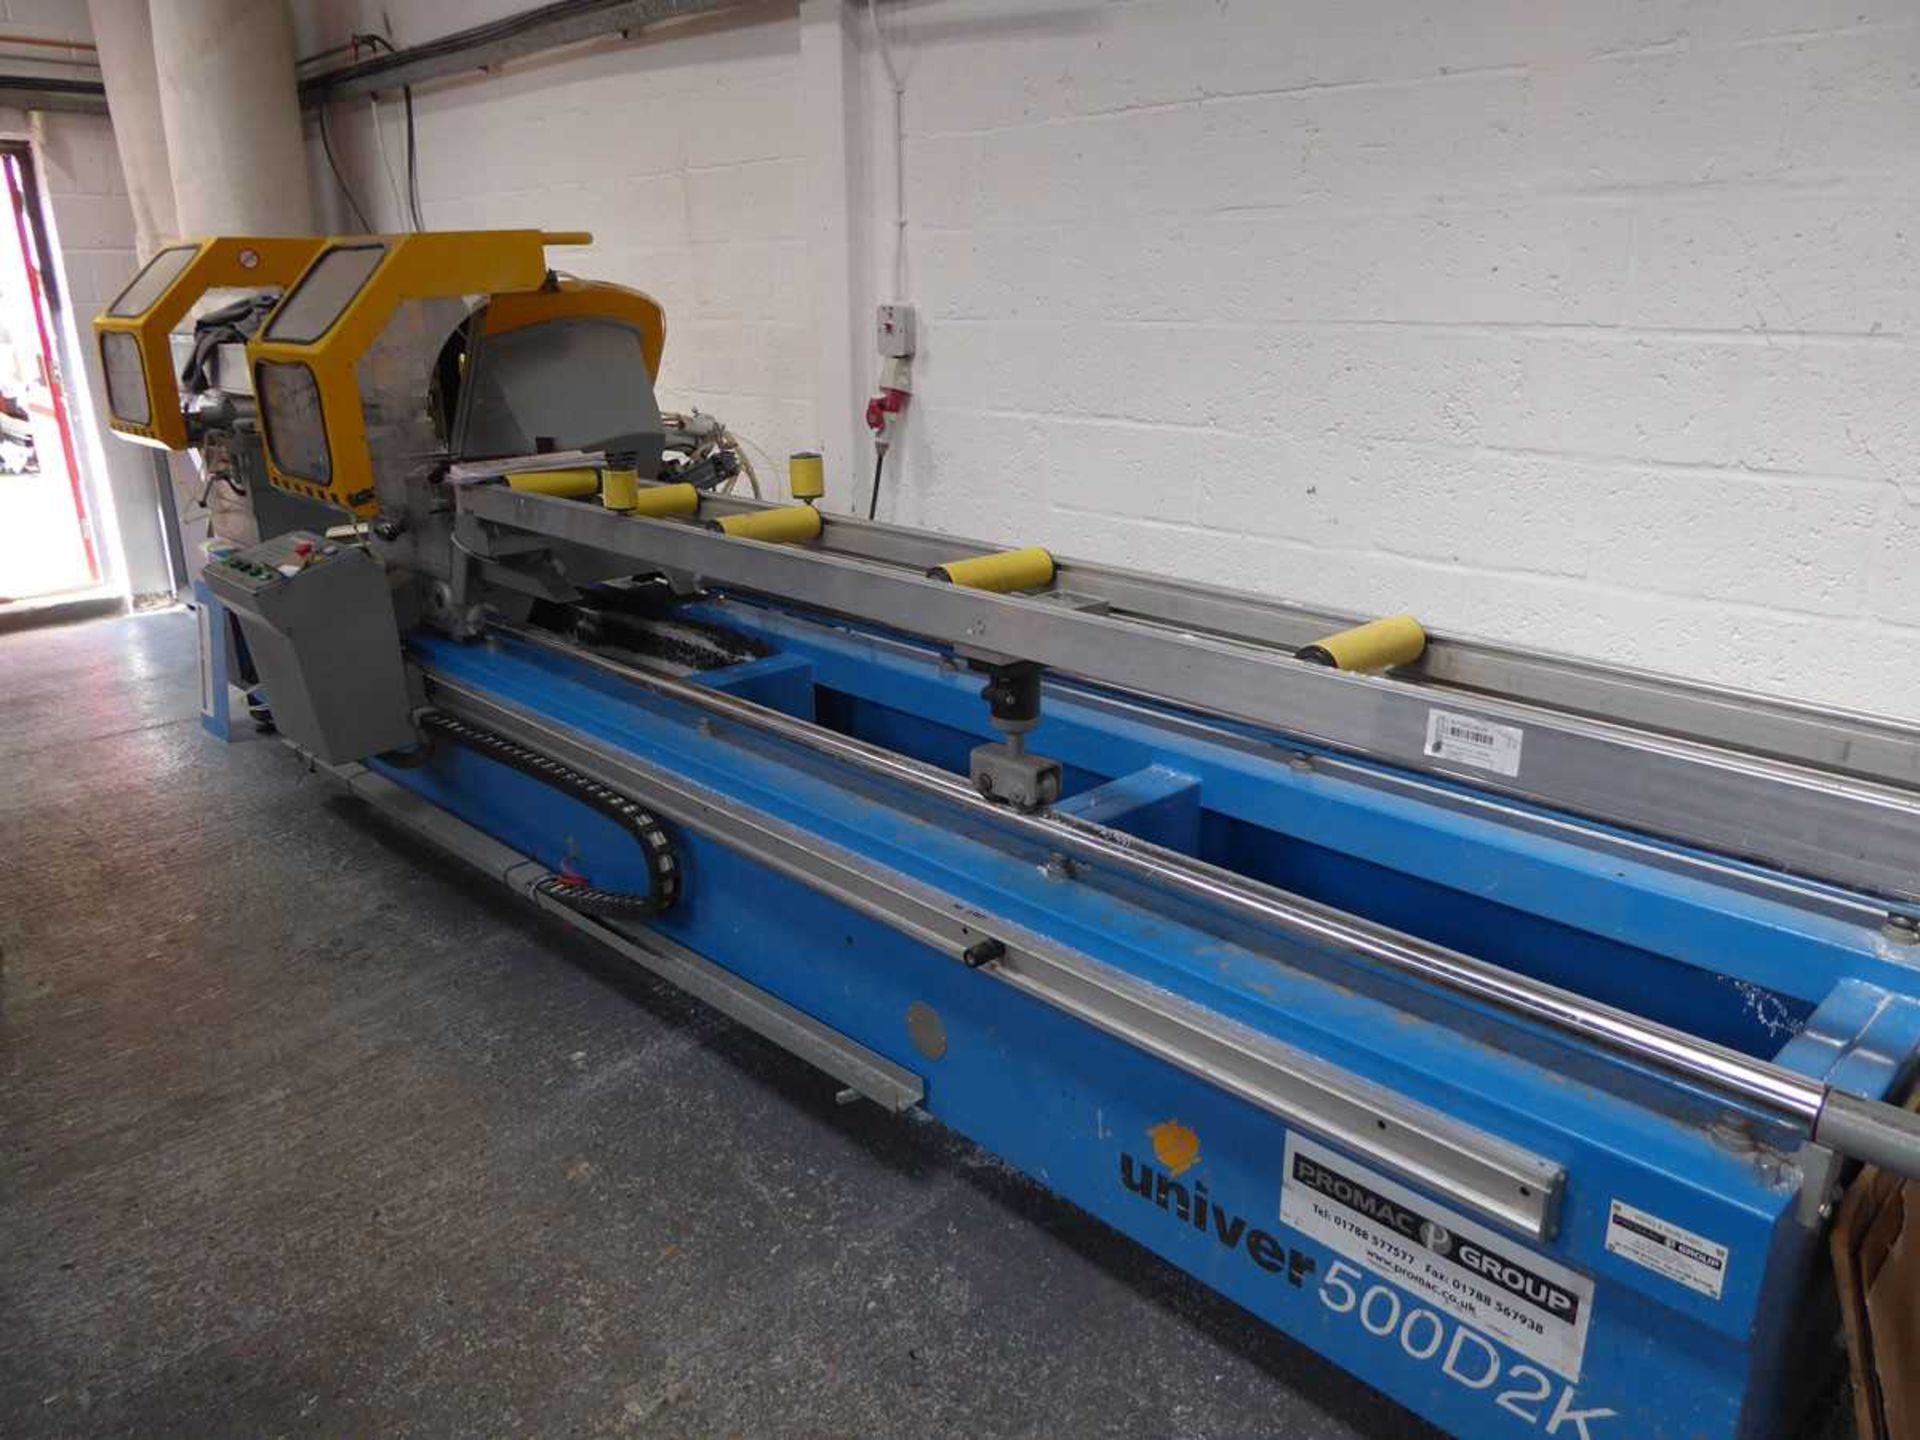 Pertici Univer 500D2K double head PVCu saw, year approx 2004 - Image 2 of 10